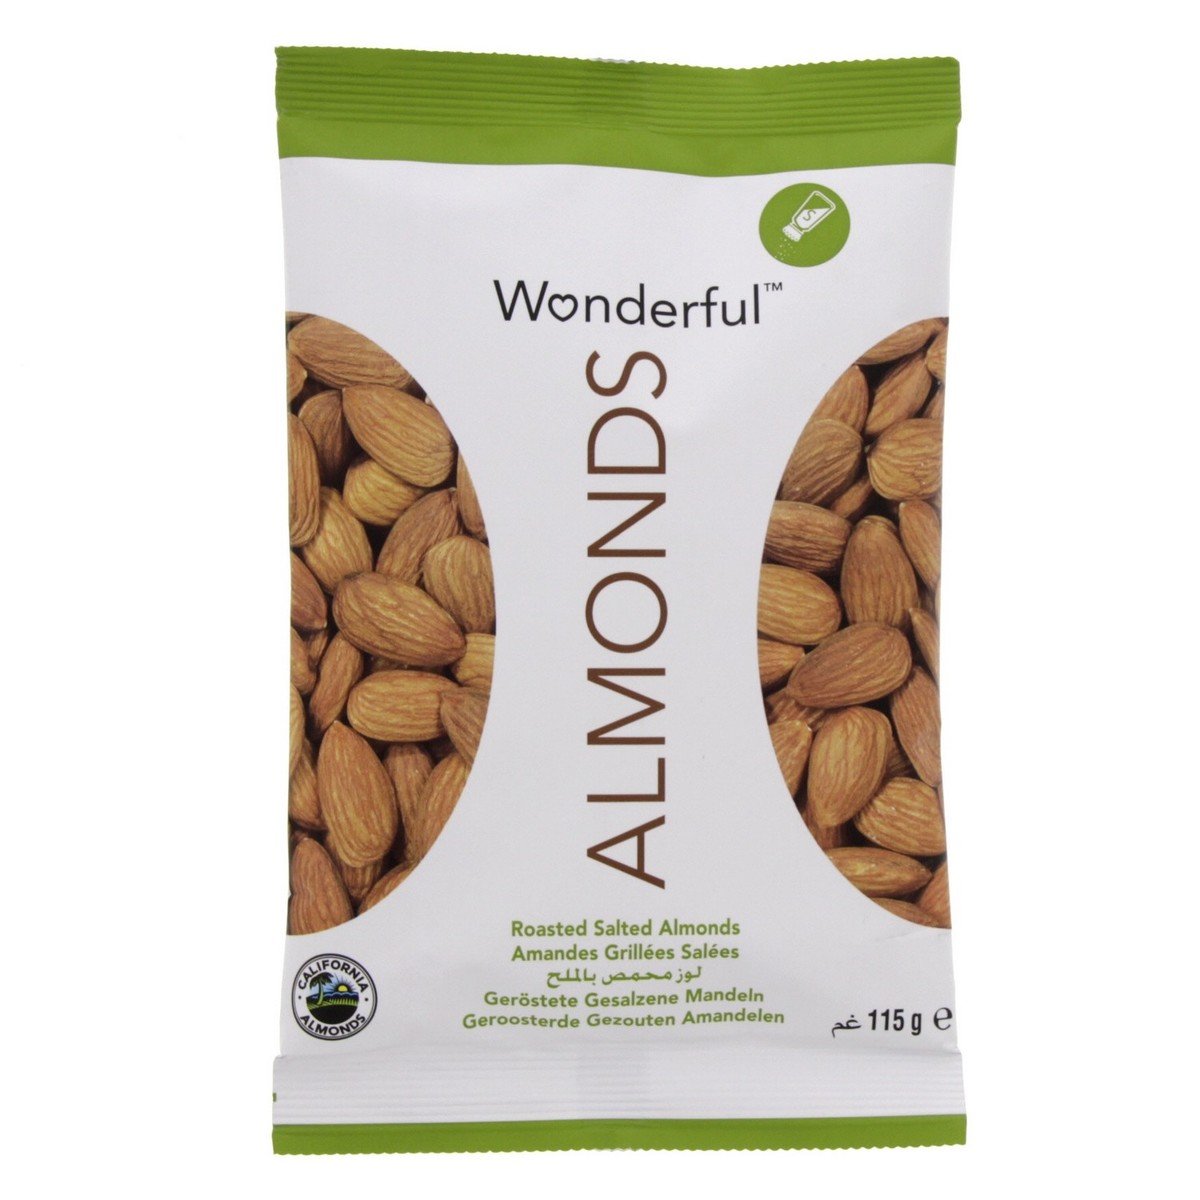 Buy Wonderful Roasted Salted Almonds 115 g Online at Best Price | Nuts Processed | Lulu Kuwait in Kuwait